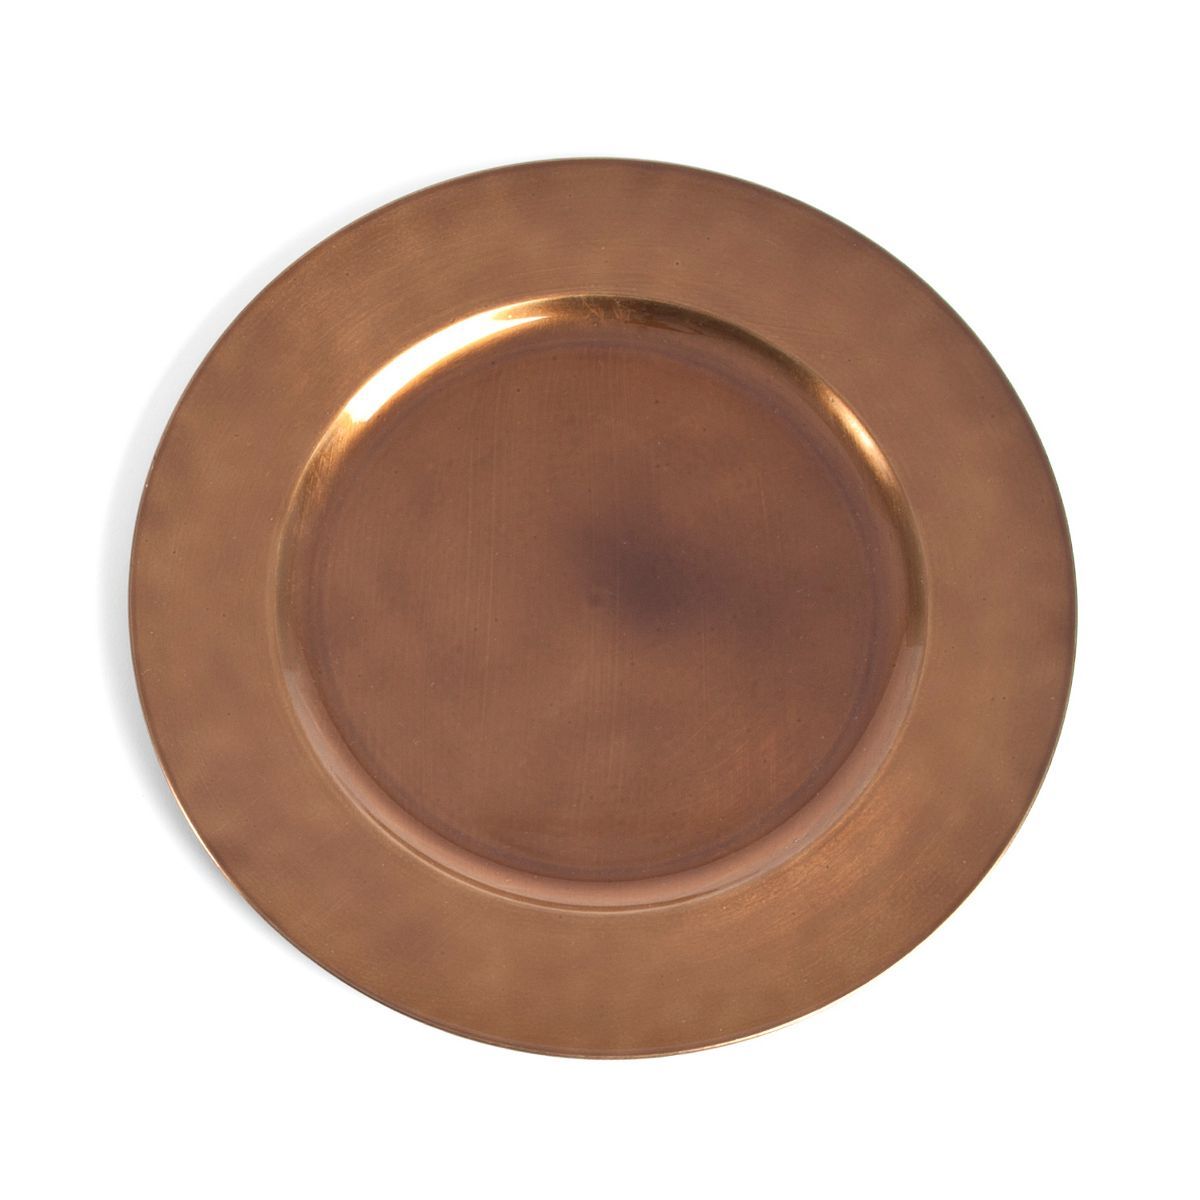 Saro Lifestyle Classic Solid Color Charger Plates | Target